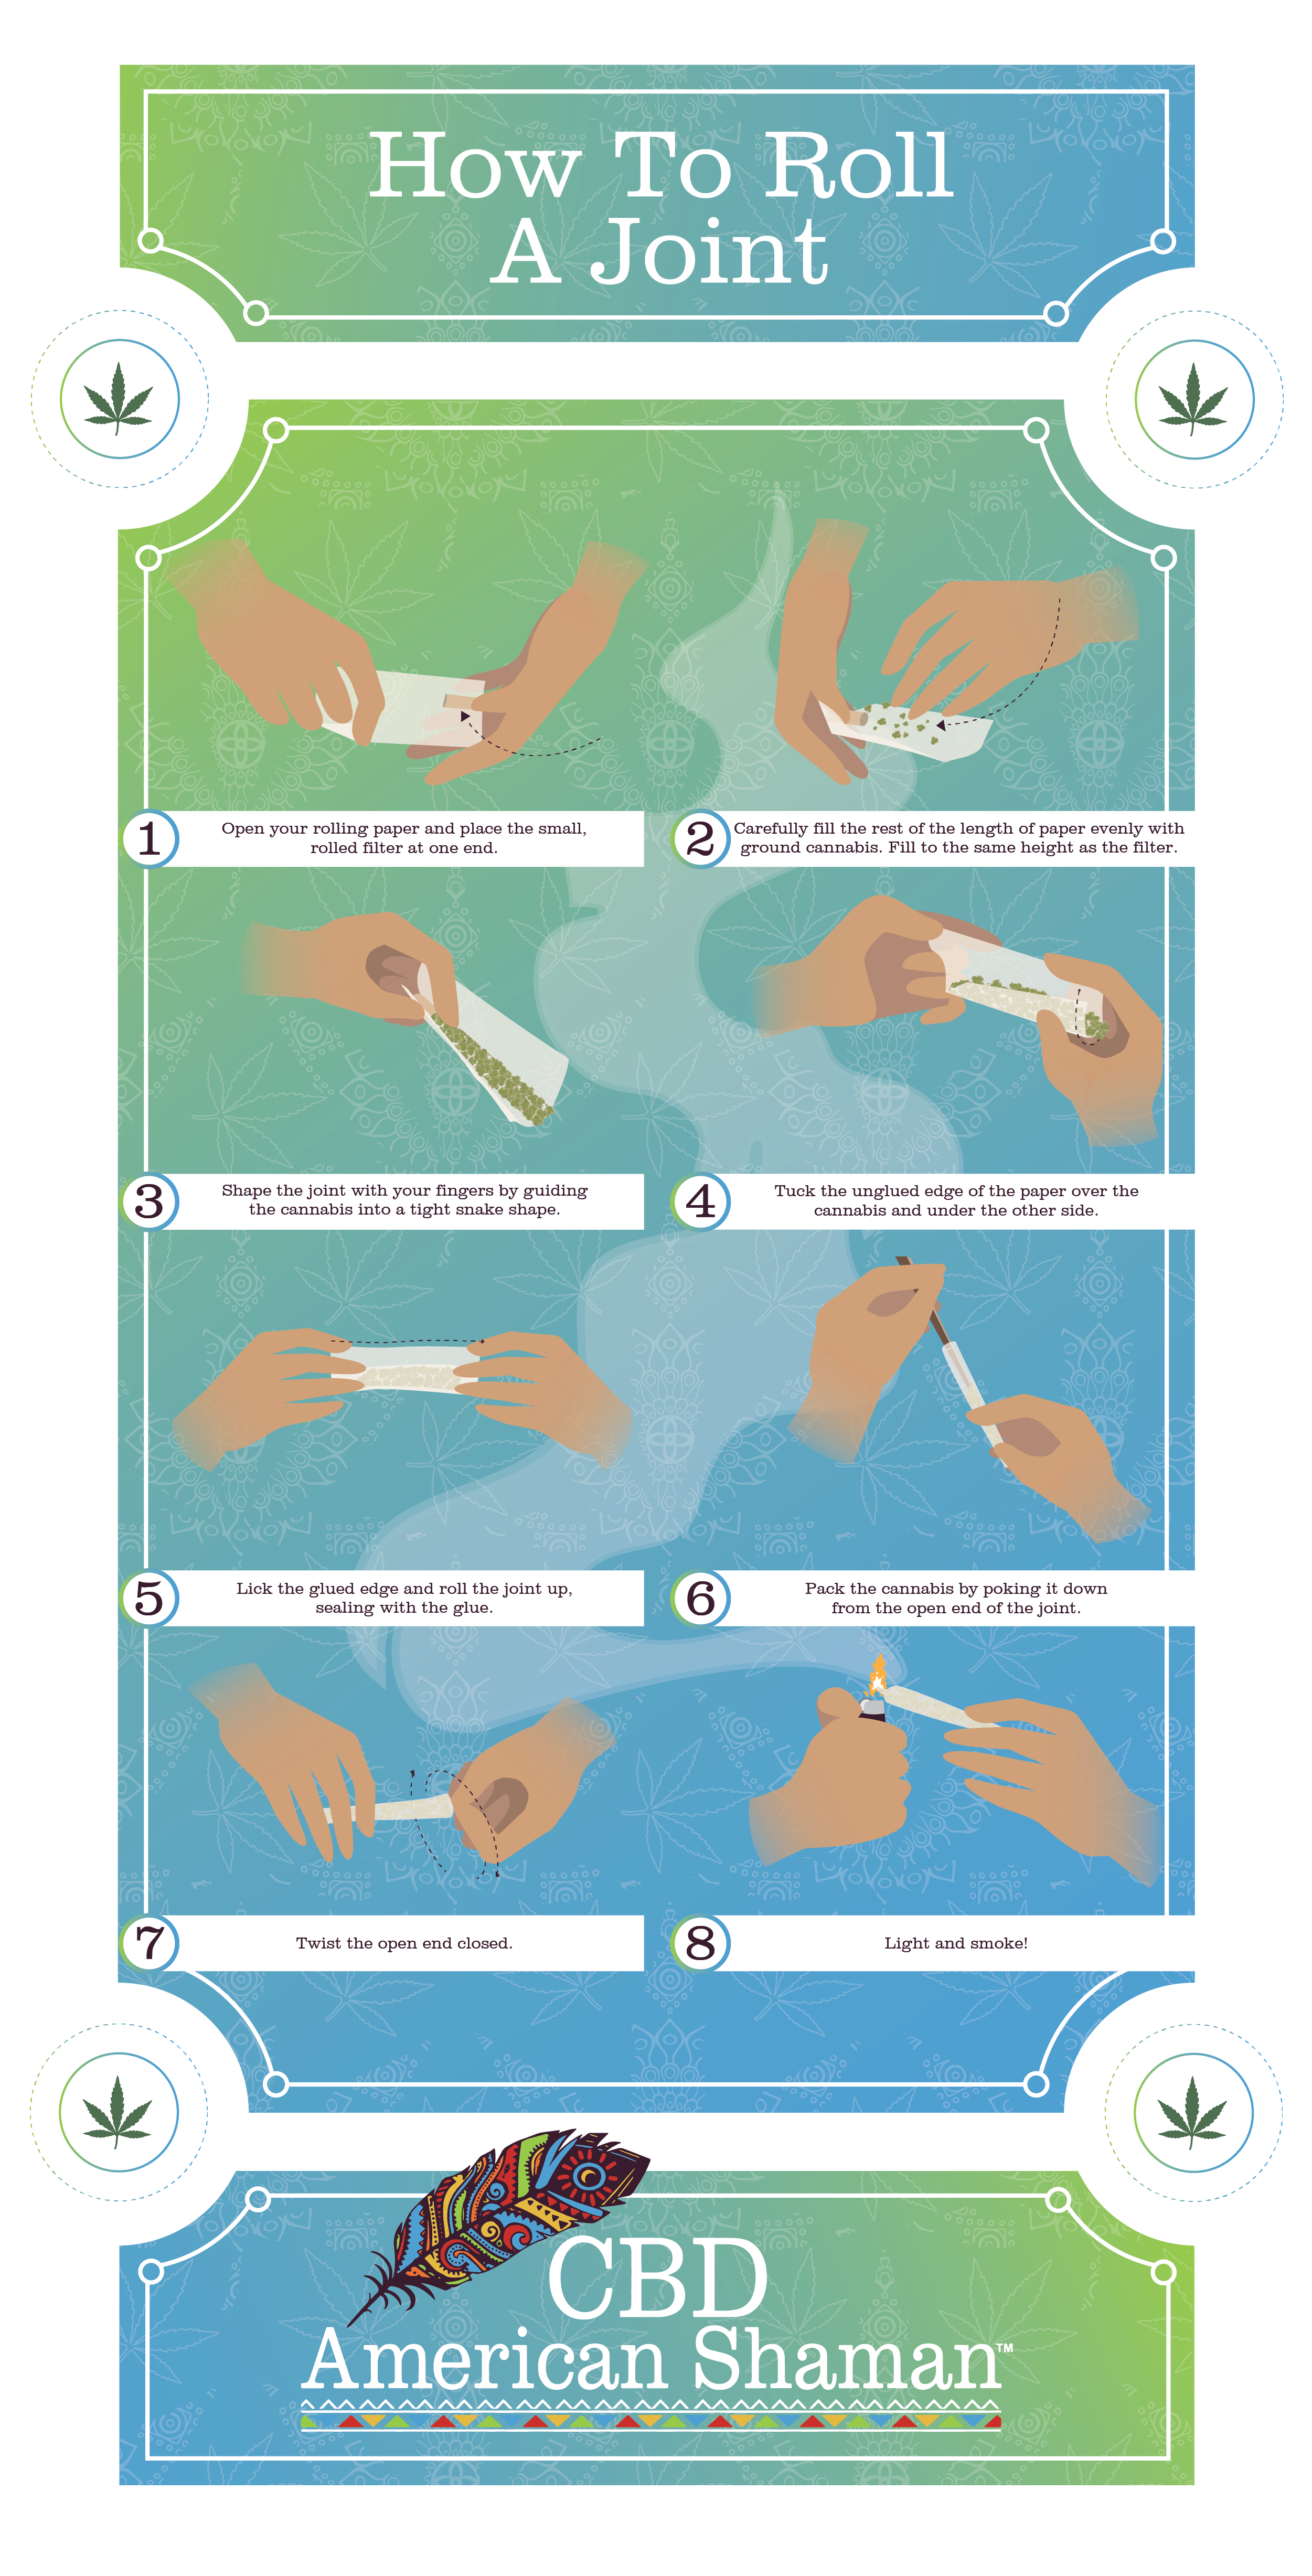 8 Steps For How To Roll A Joint